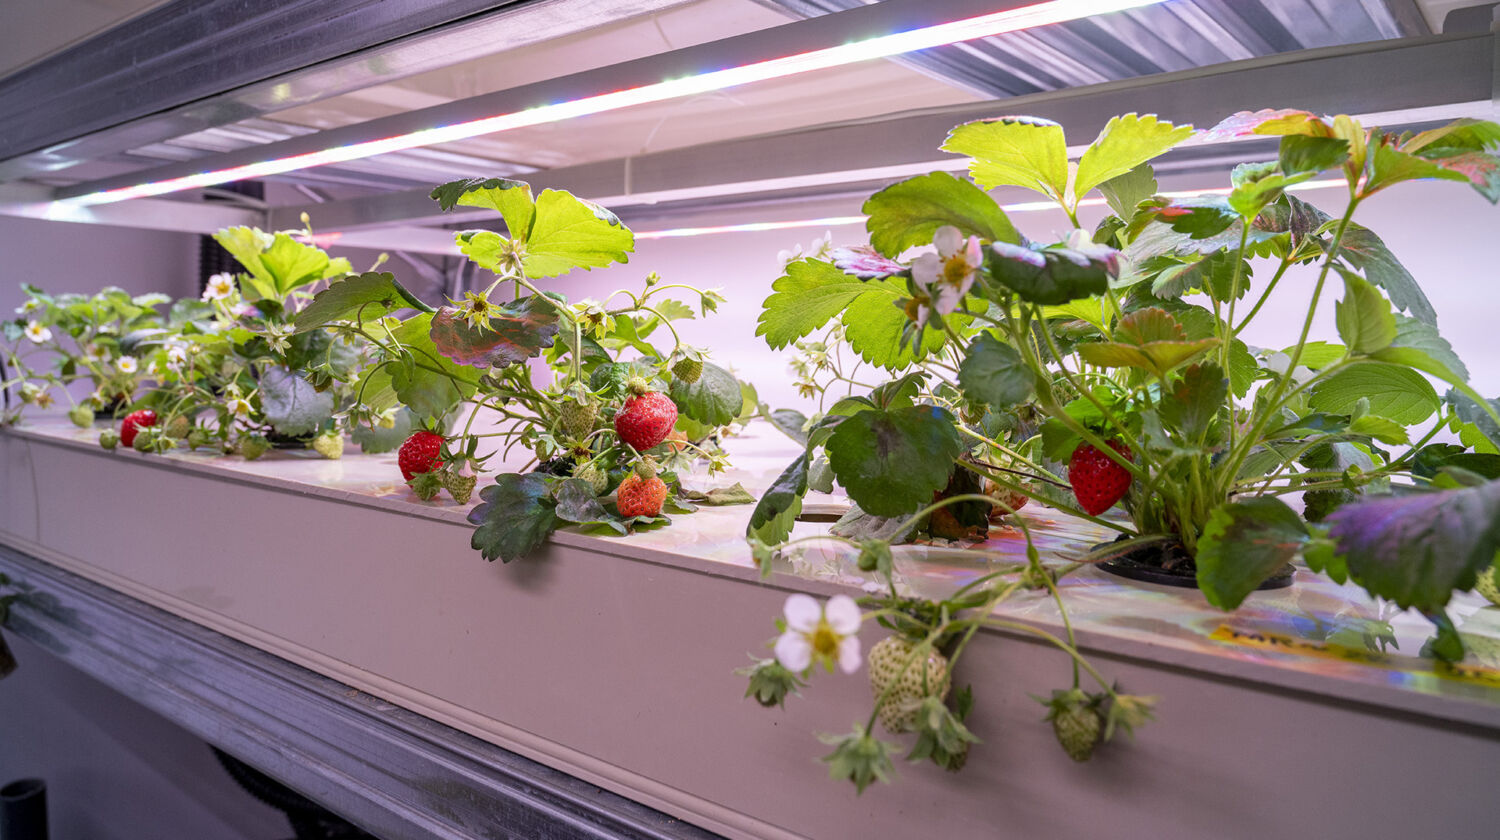 Breakthrough: Hydroponics vs Aquaponics in strawberry cultivation brings great results